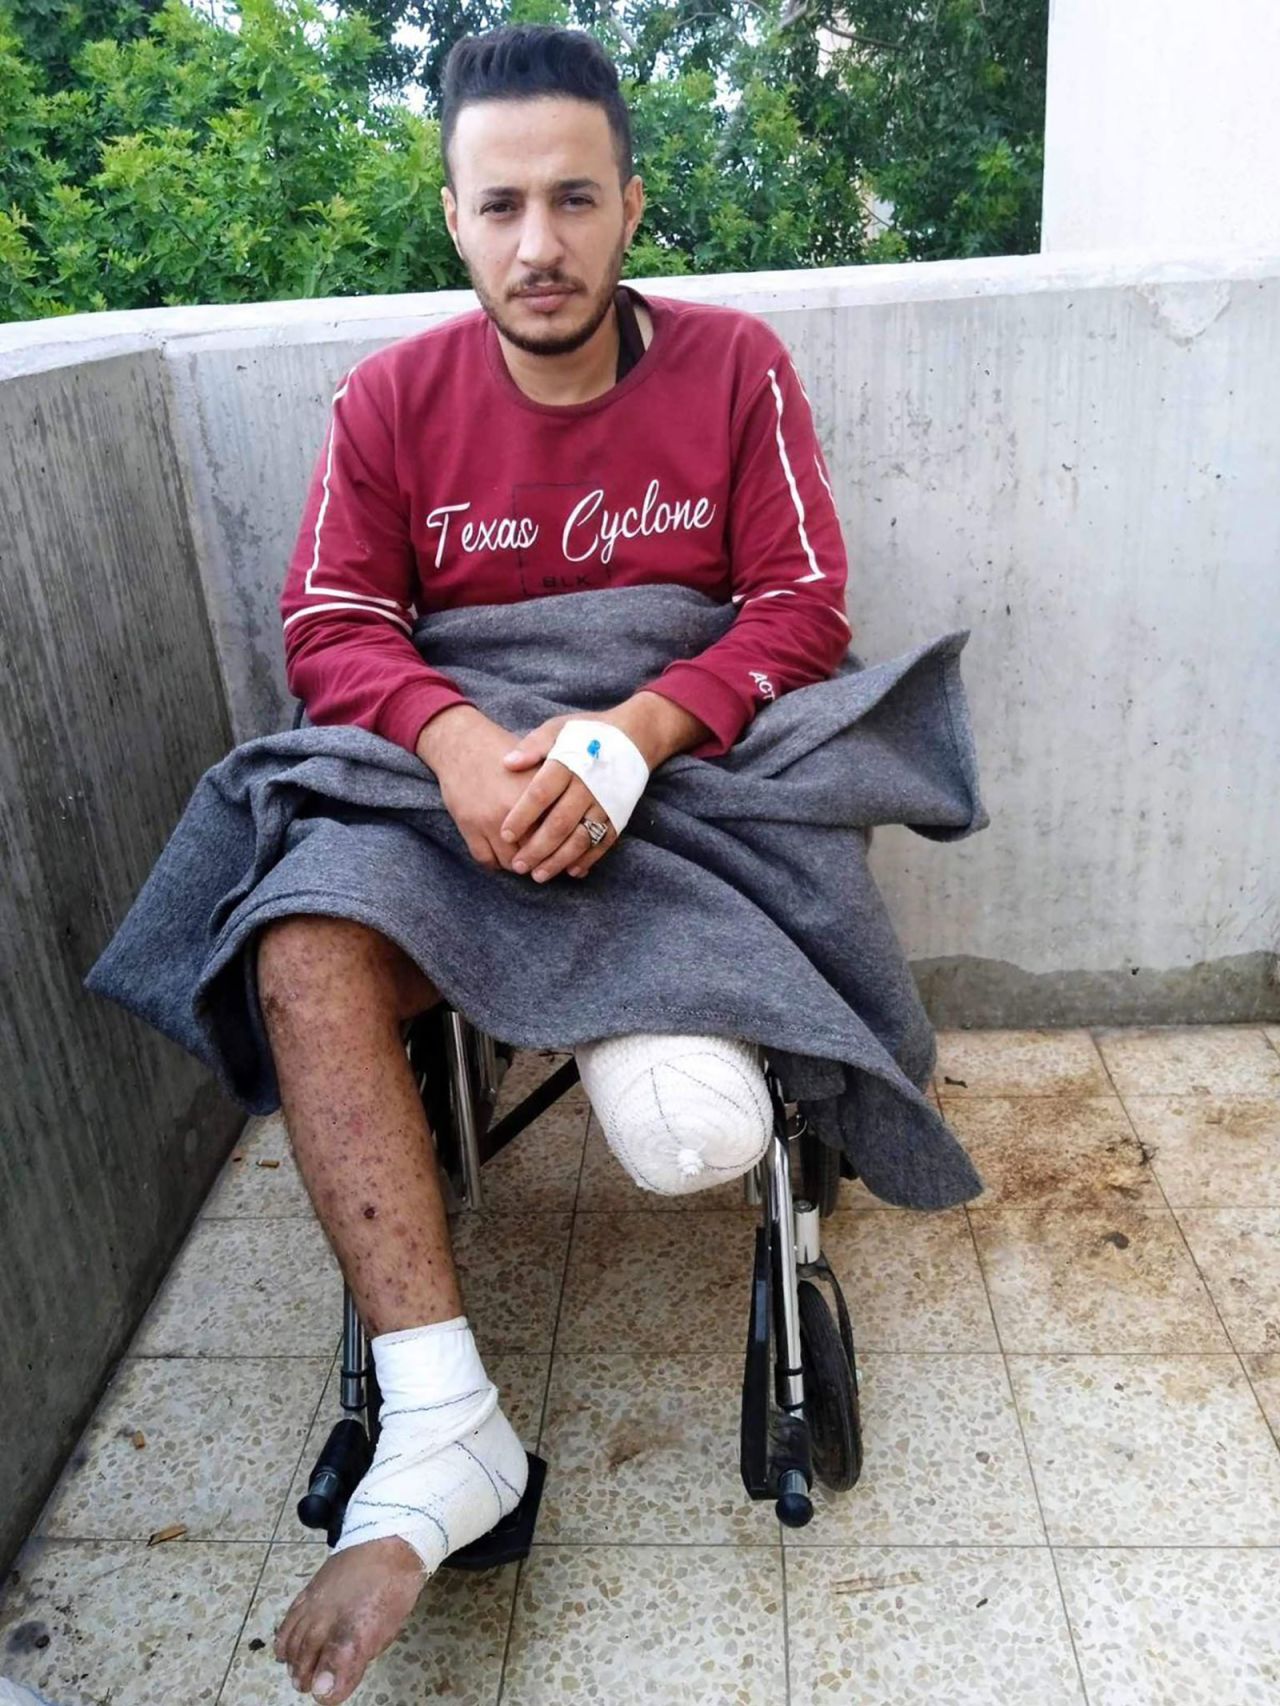 Muhammad Hassan Abu Watfa in Khan Younis, Gaza, last month. He was severely wounded by a strike while trying to buy bread in the Sheikh Radwan neighborhood, in northern Gaza, on October 16. His right foot was amputated twice.